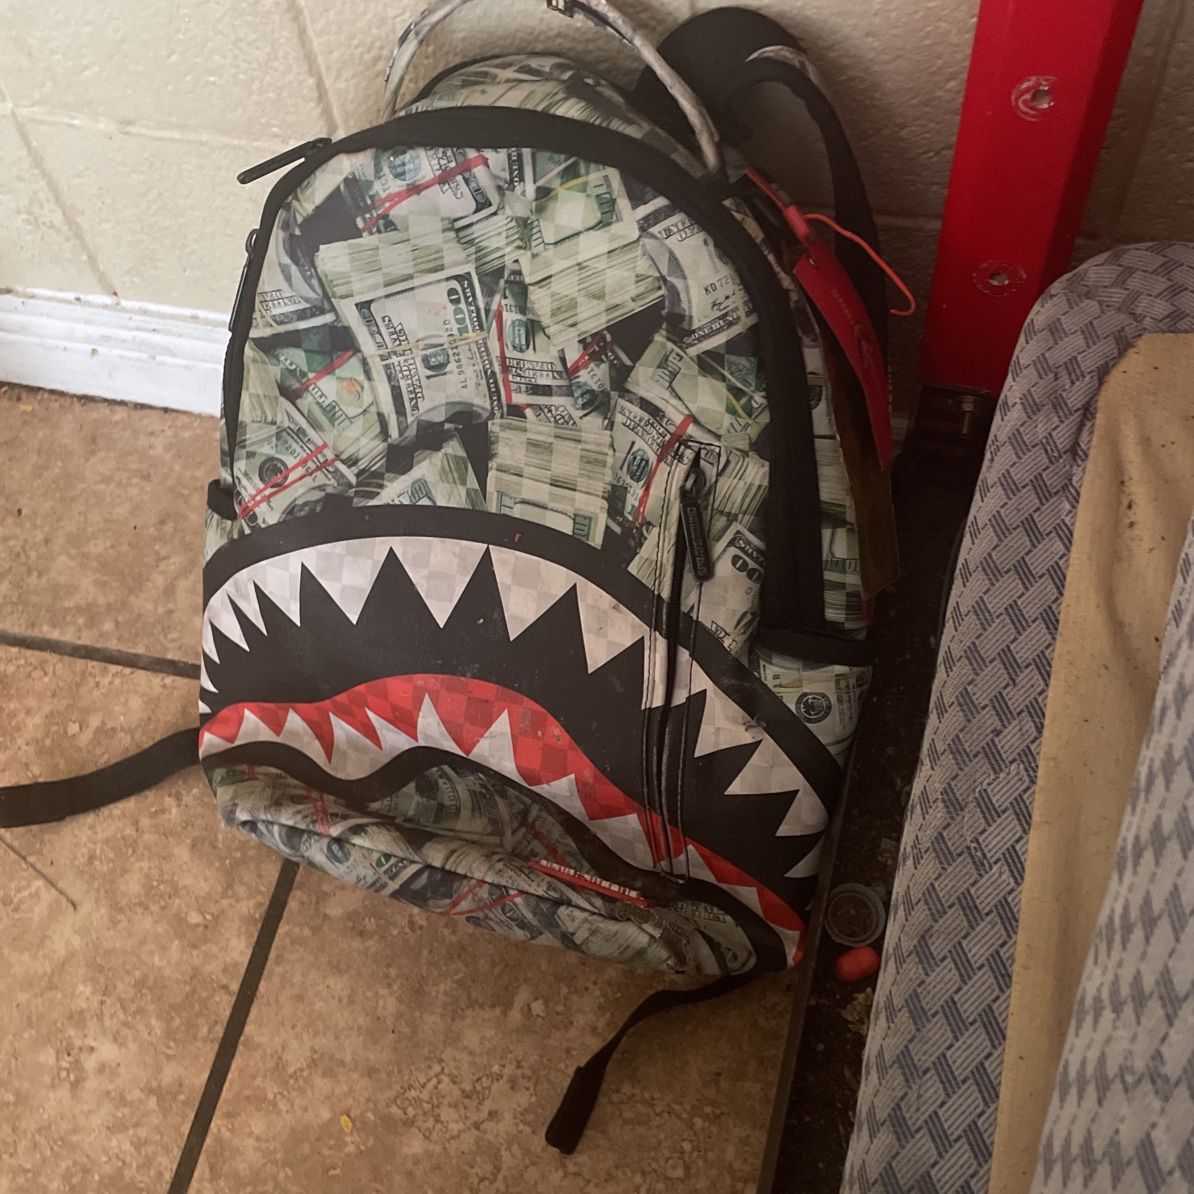 Bape Backpack for Sale in Fontana, CA - OfferUp